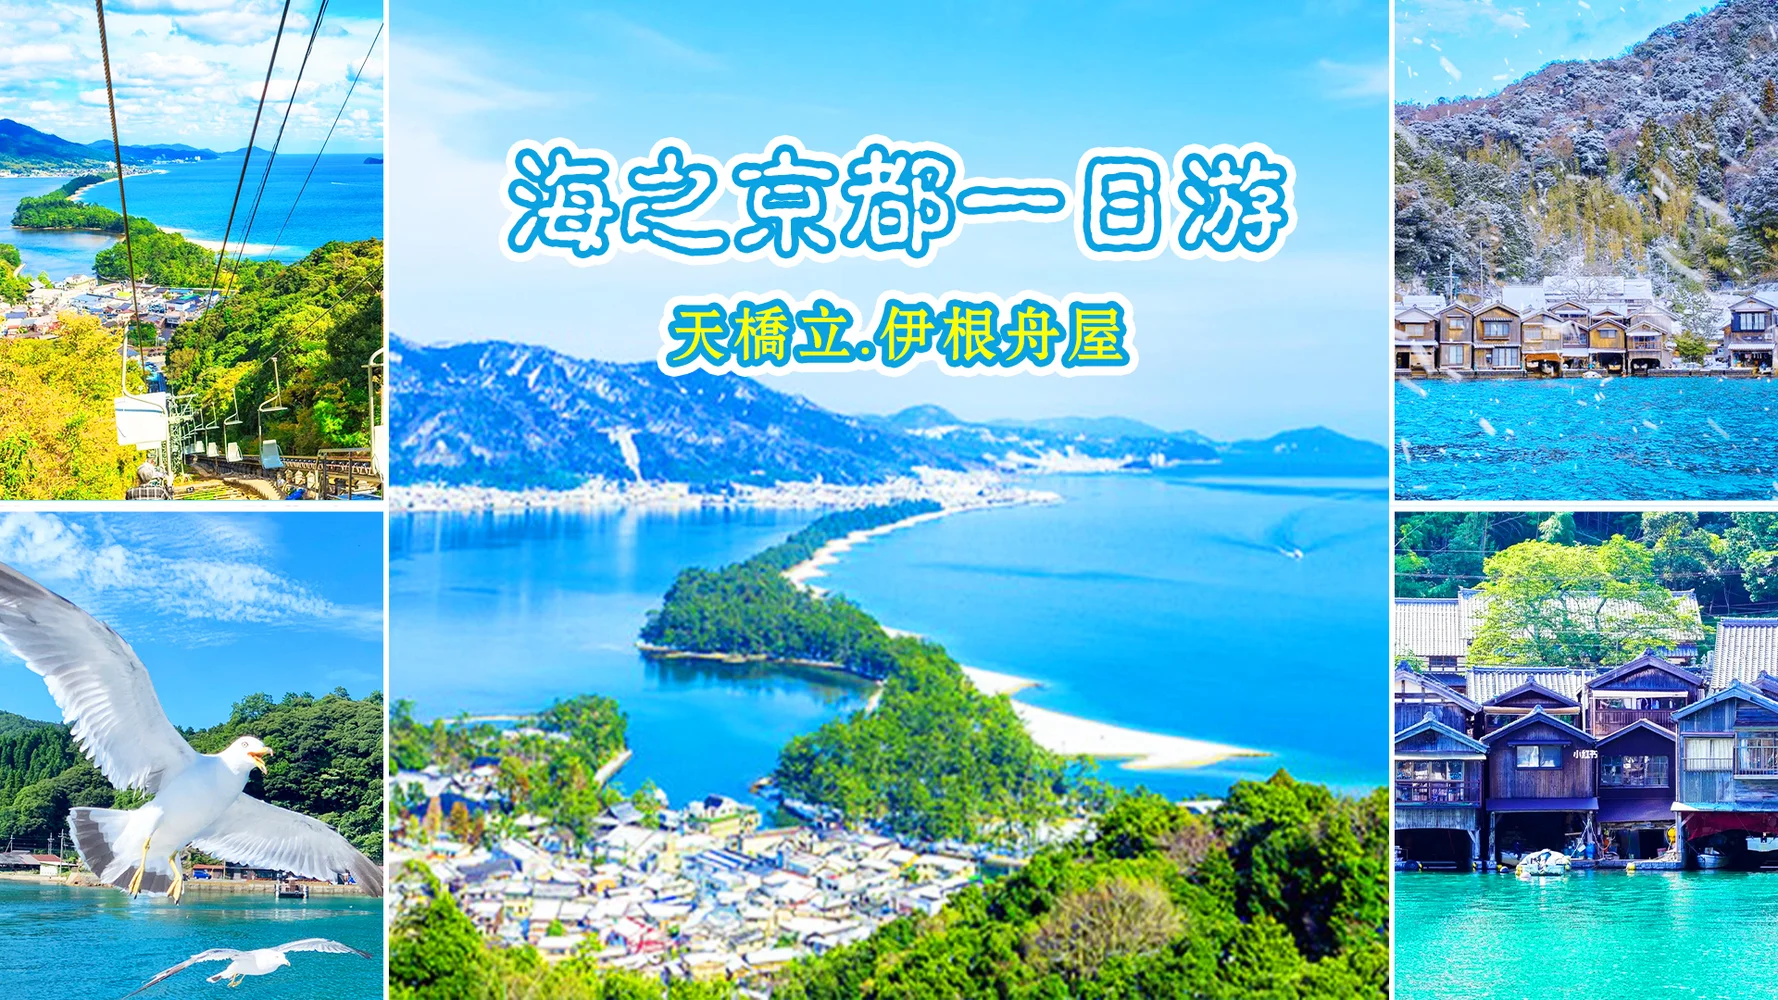 Kyoto-by-the-Sea Amanohashidate Tour from Kyoto or Osaka